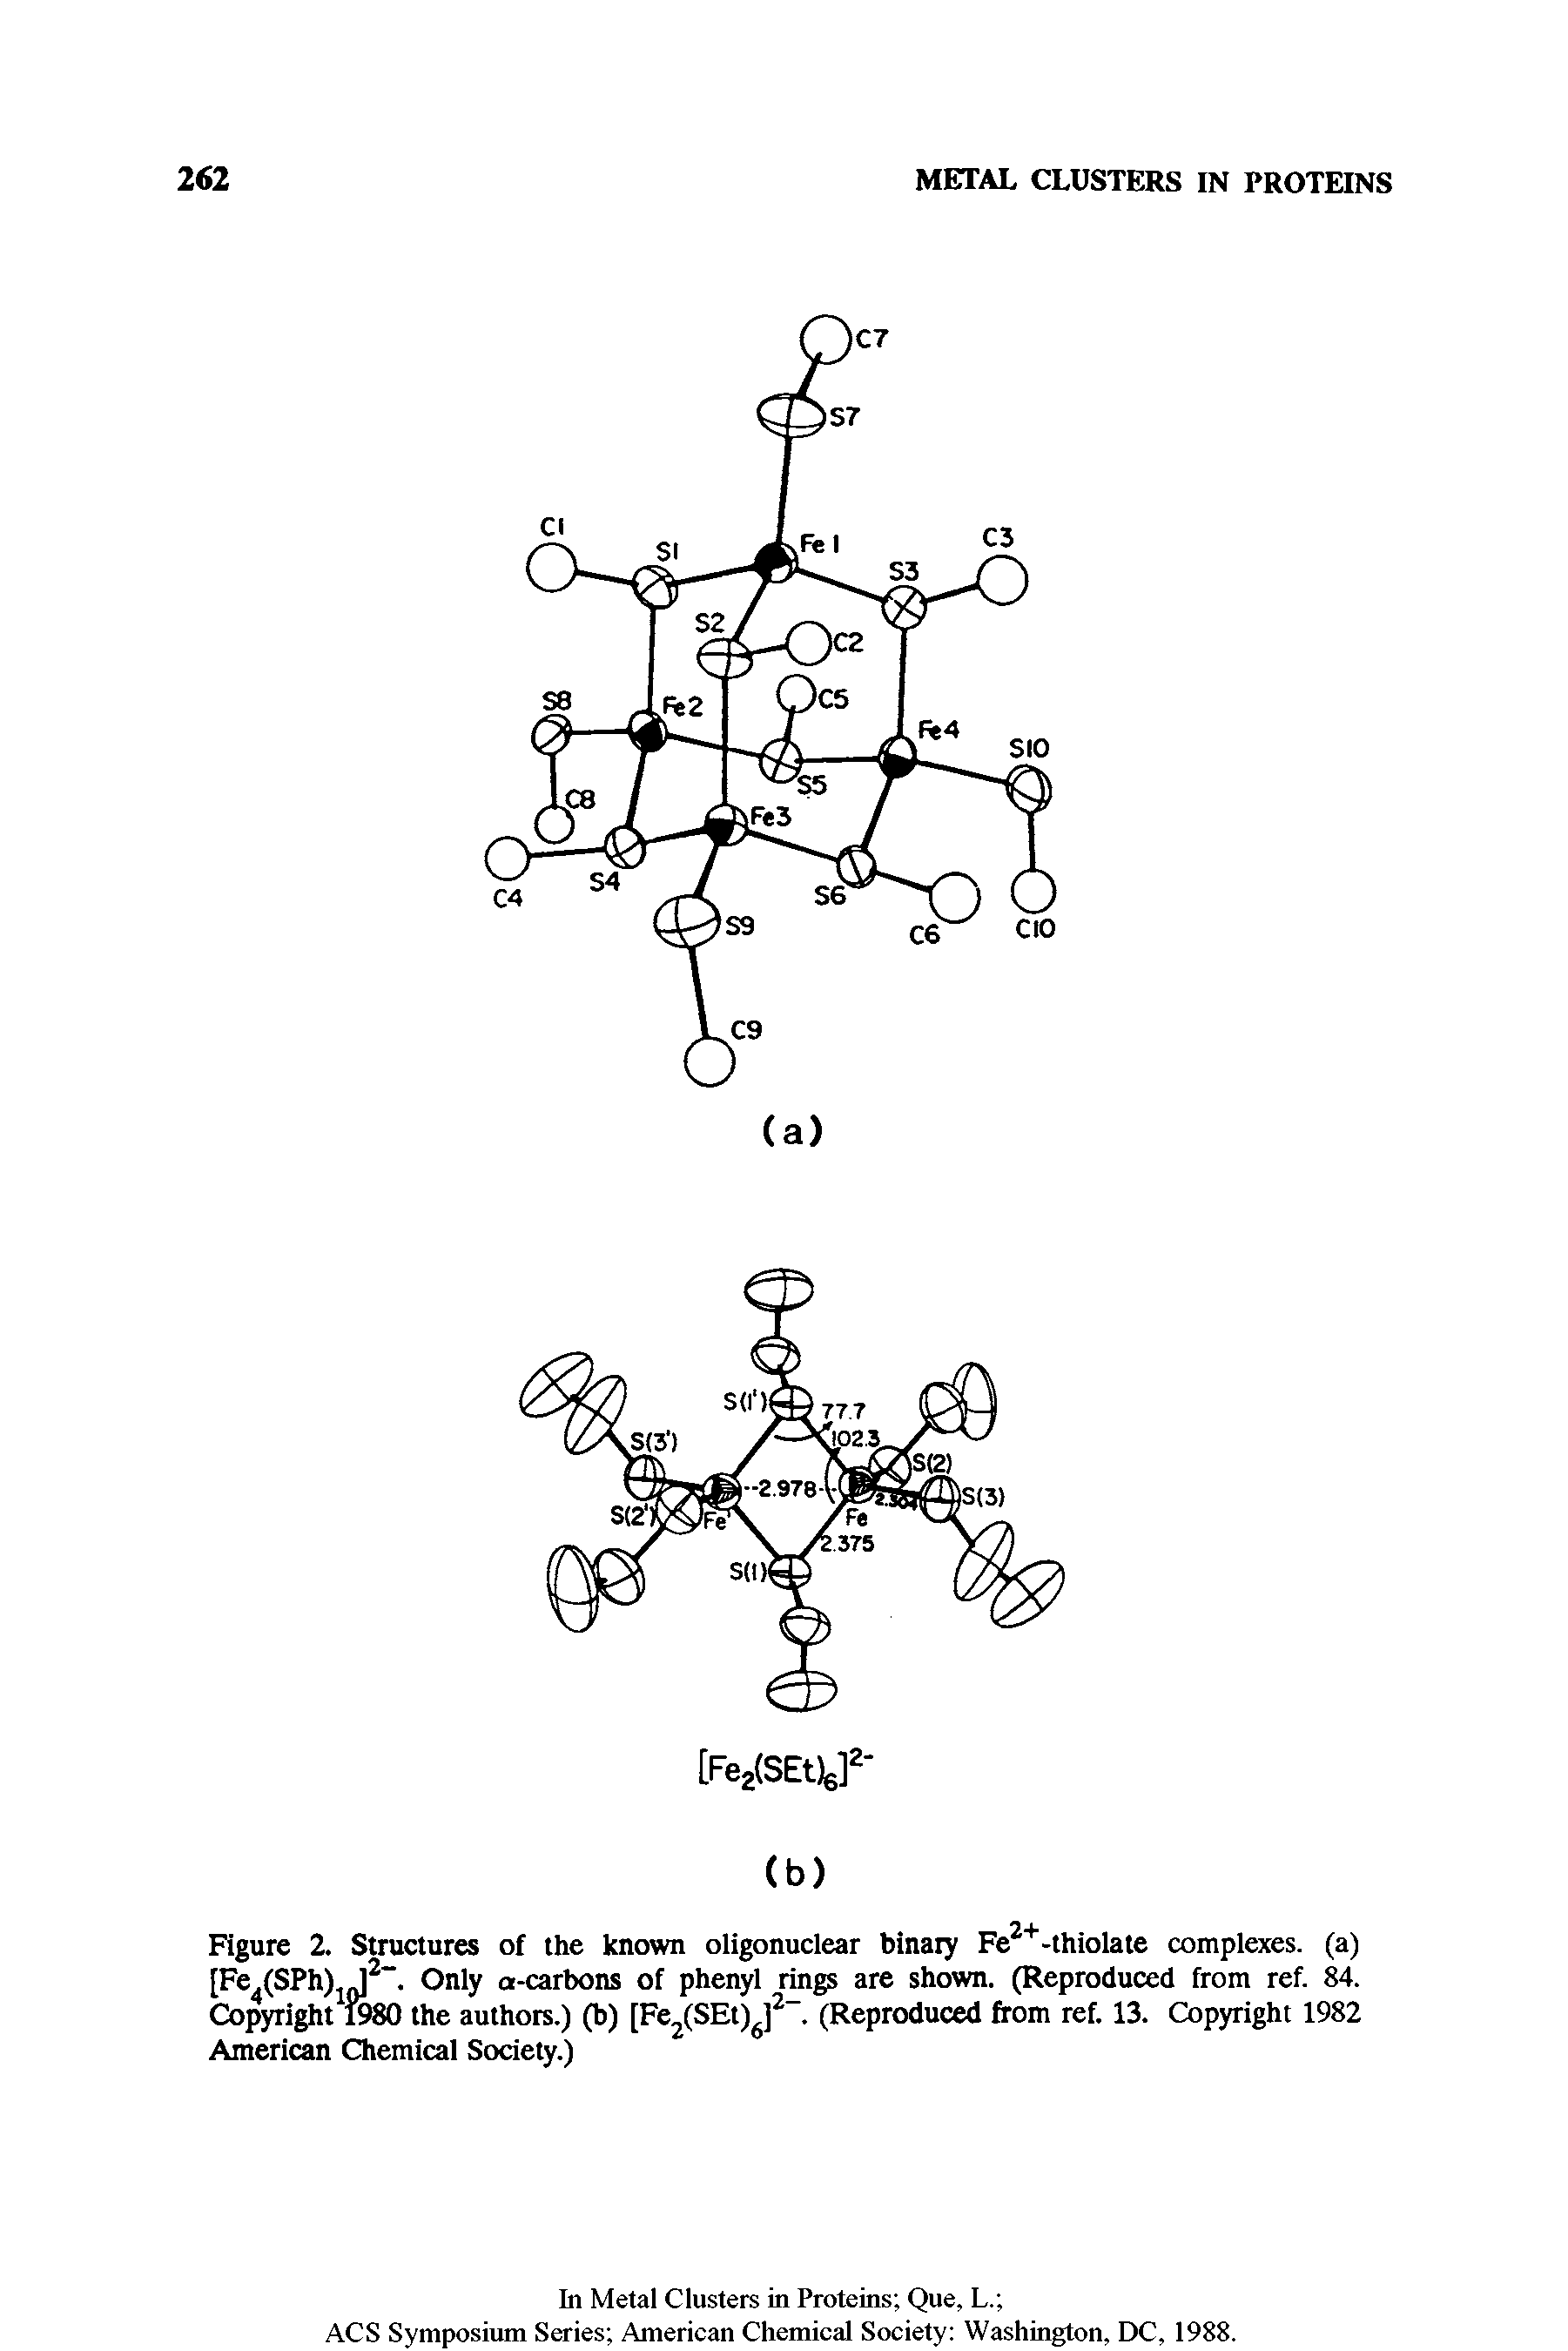 Figure 2. Structures of the known oligonuclear binary Fe -thiolate complexes, (a) [Fe.(SPh)jJ . Only a-carbons of phenyl rings are shown. (Reproduced from ref. 84. Copyright W80 the authors.) (b) [Fe CSEt) ] ". (Reproduced from ref. 13. Copyright 1982 American Chemical Society.)...